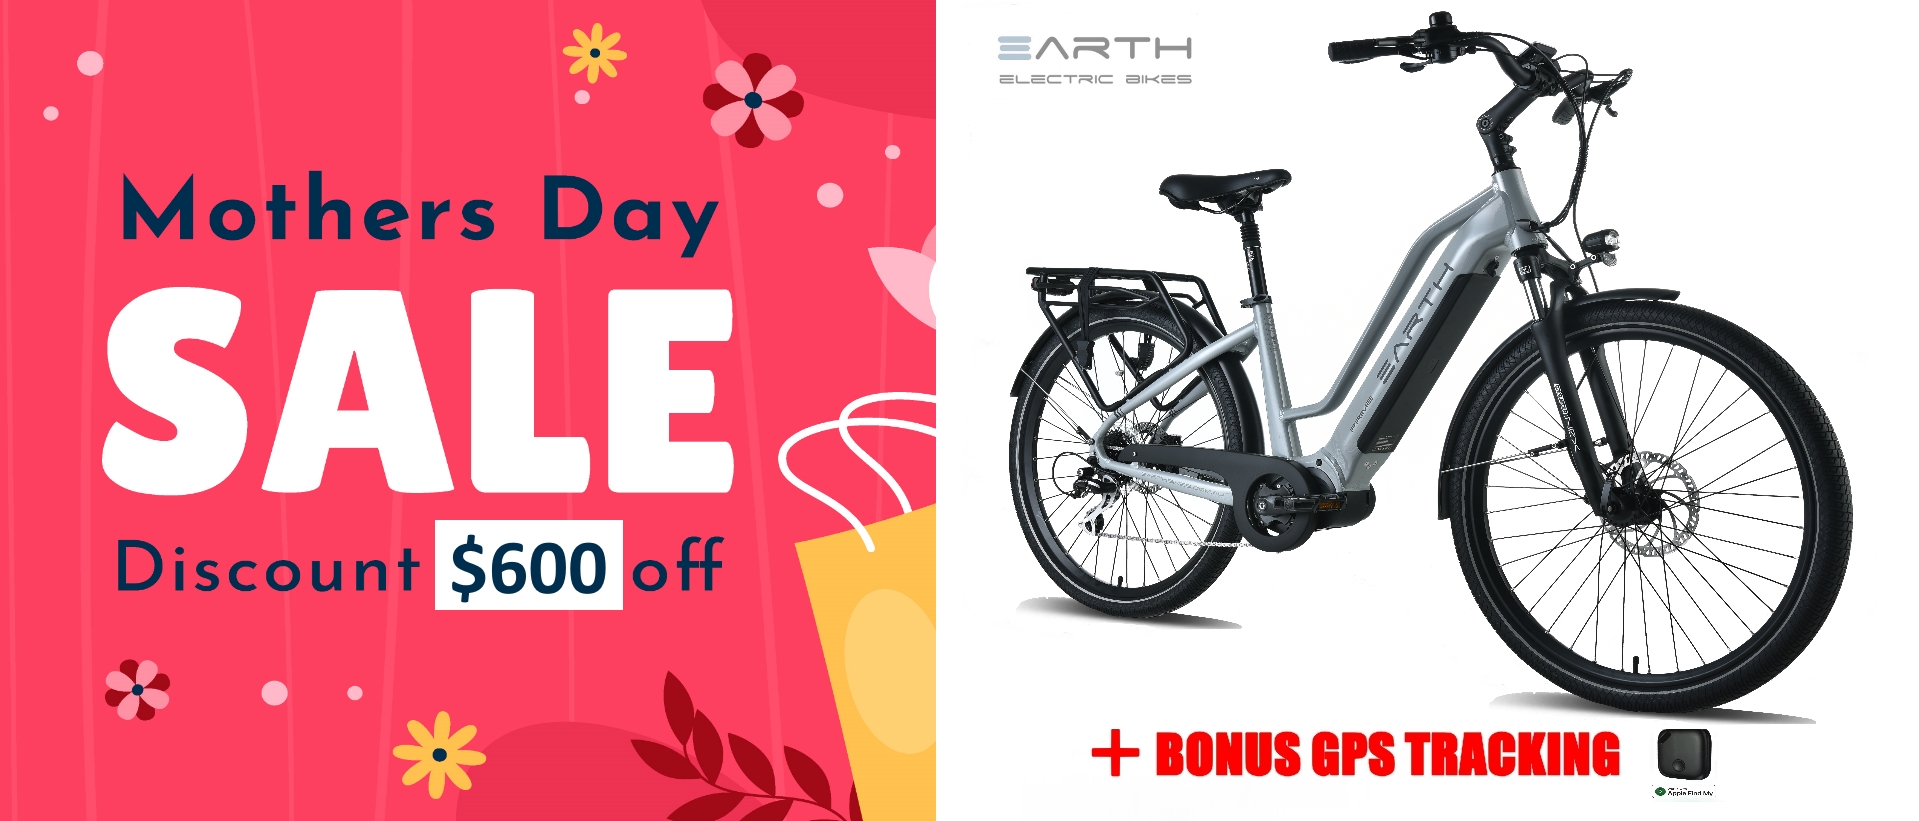 electric-bikes-superstore-mothers-day-sale-earth-prime